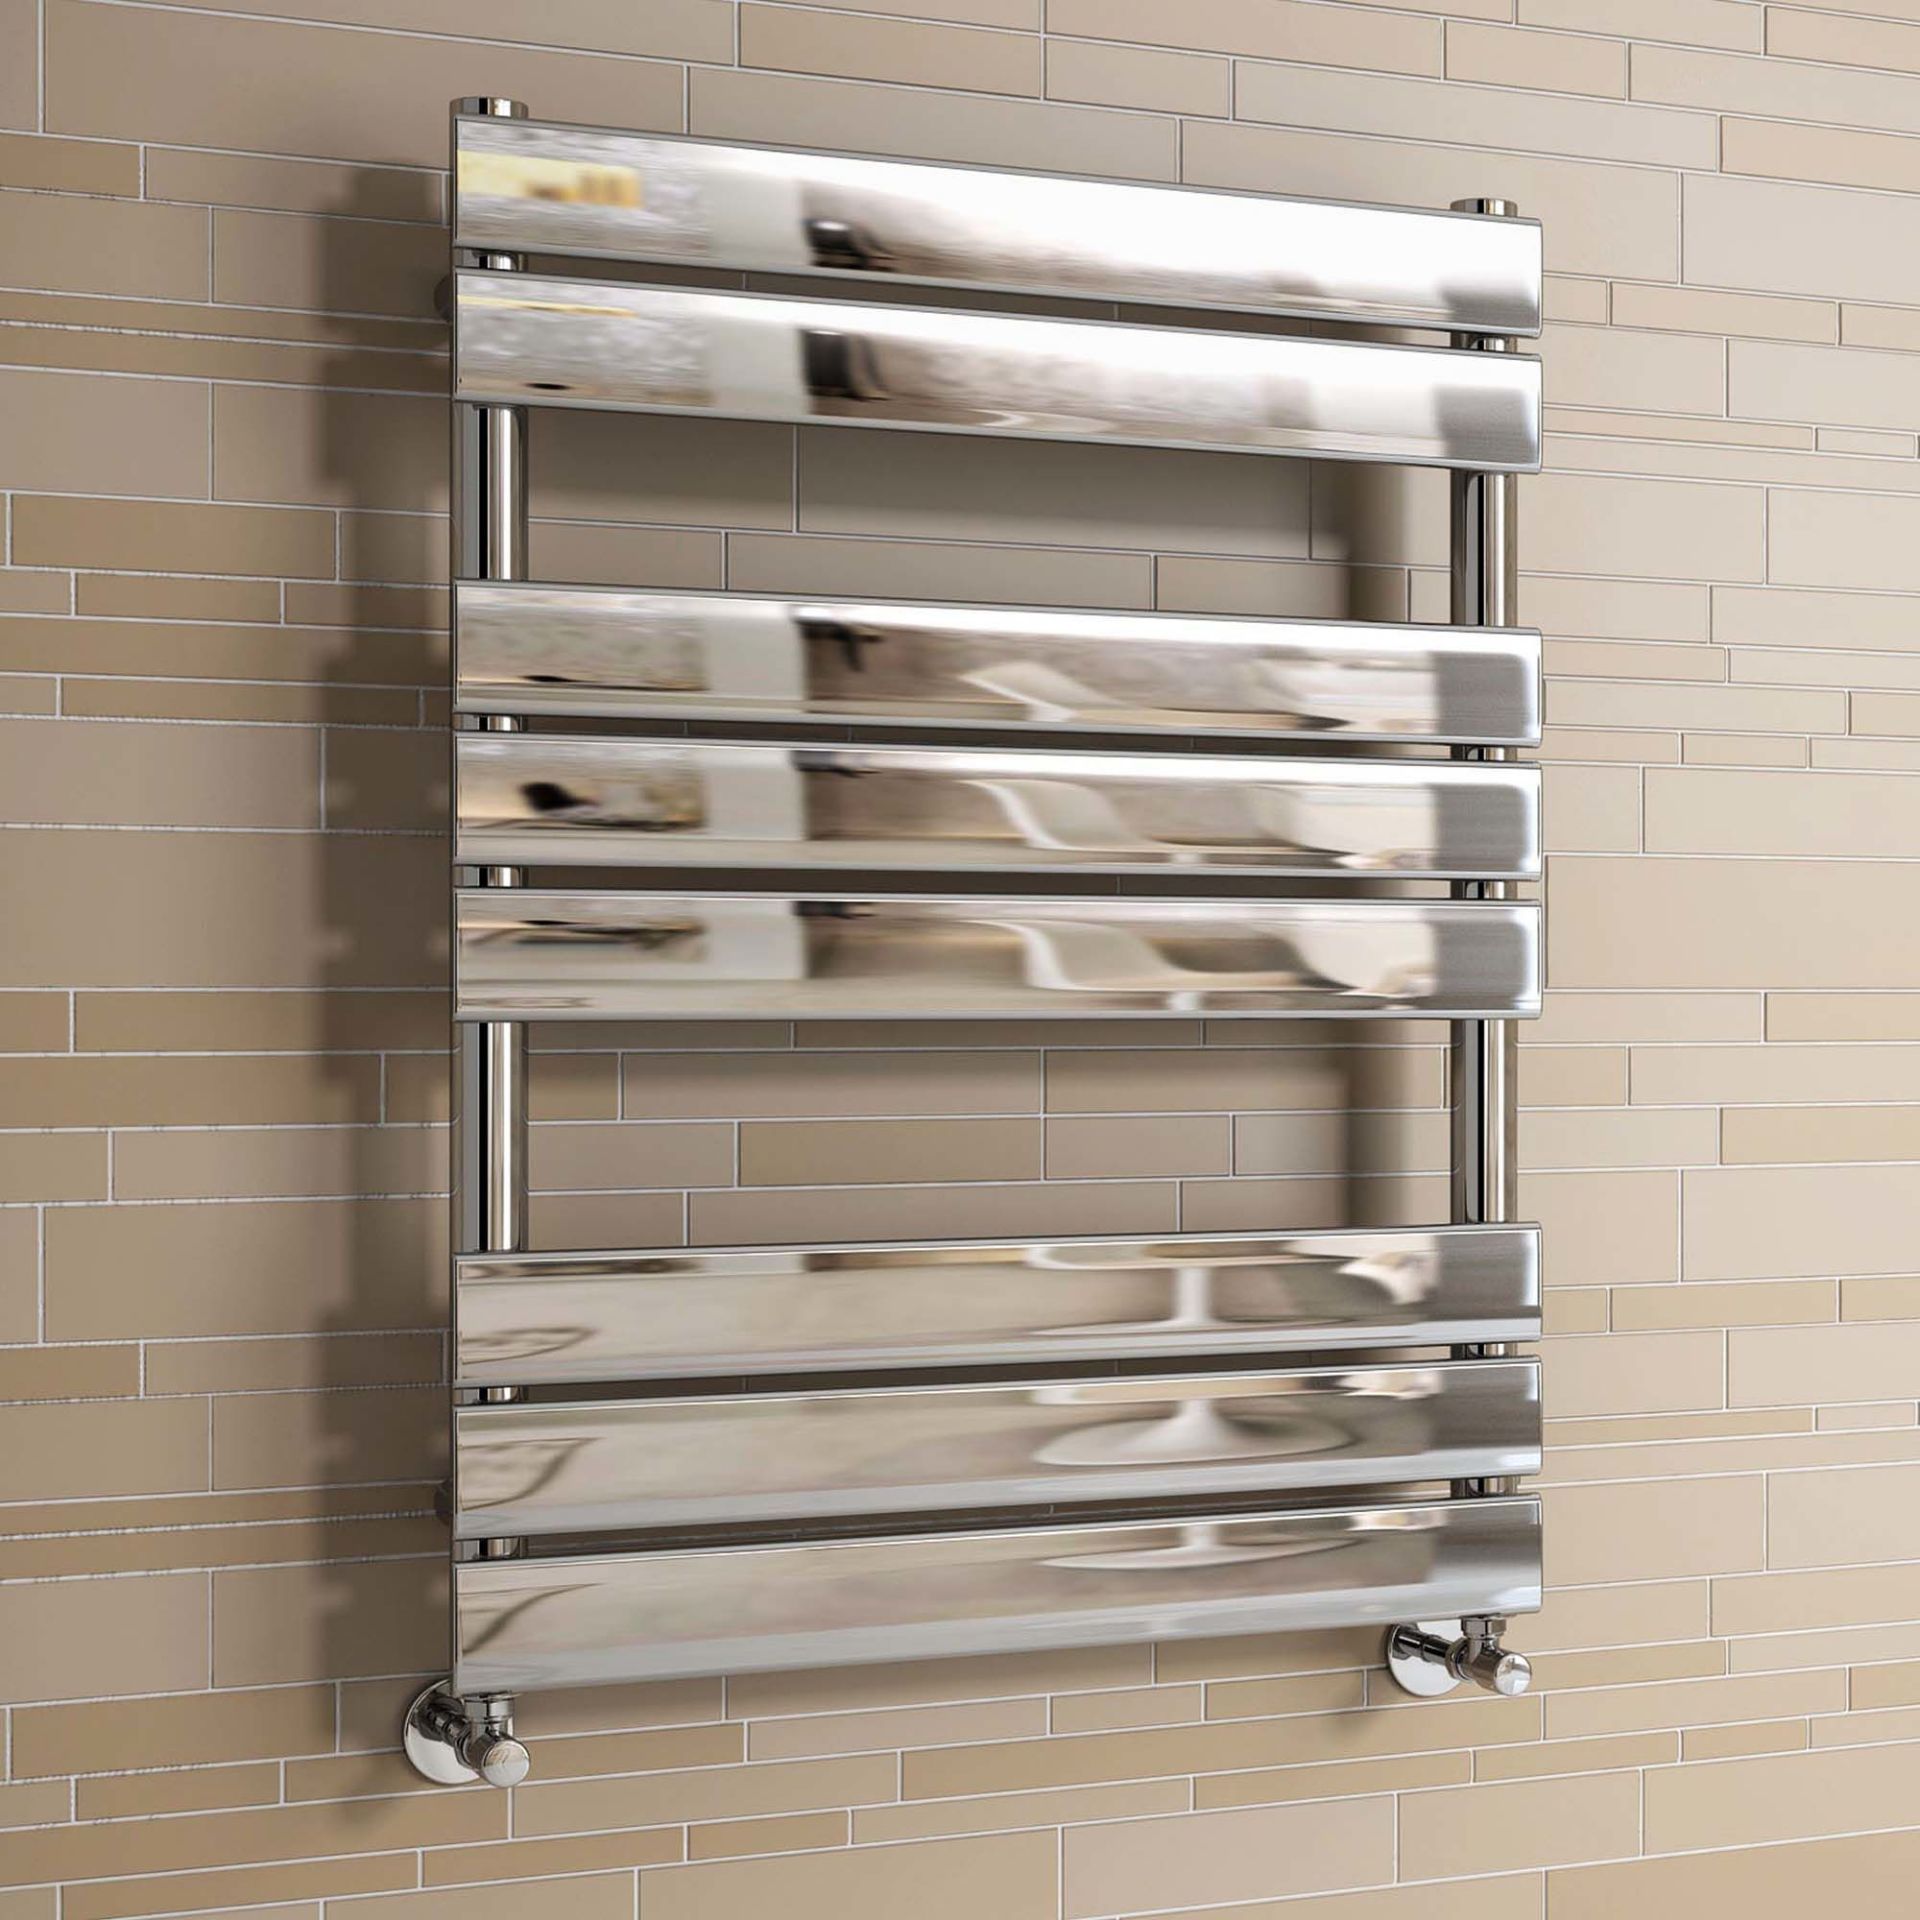 (CP45) 650x400mm Chrome Flat Panel Ladder Towel Radiator. We use low carbon steel of the highe...